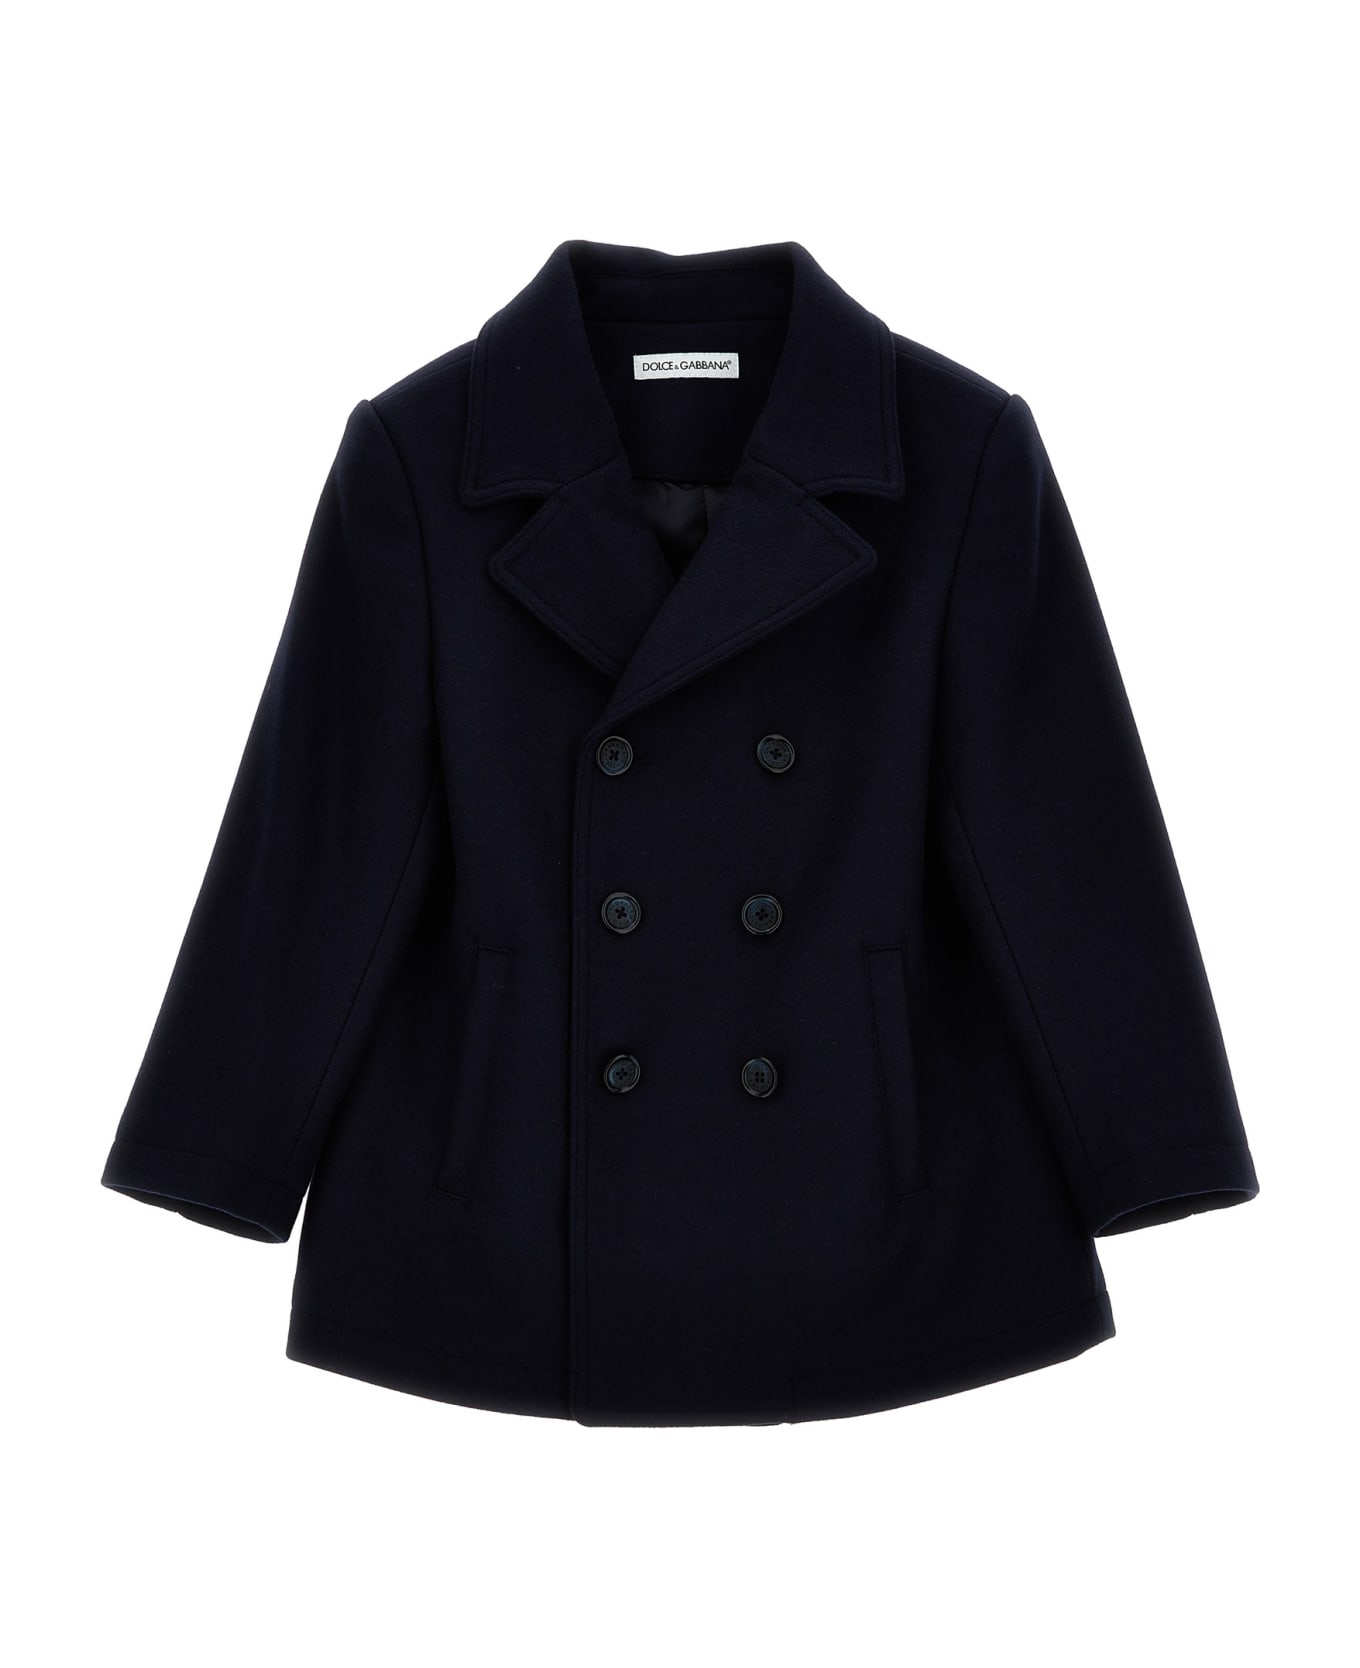 Dolce & Gabbana Double Breasted Wool Coat - Blue